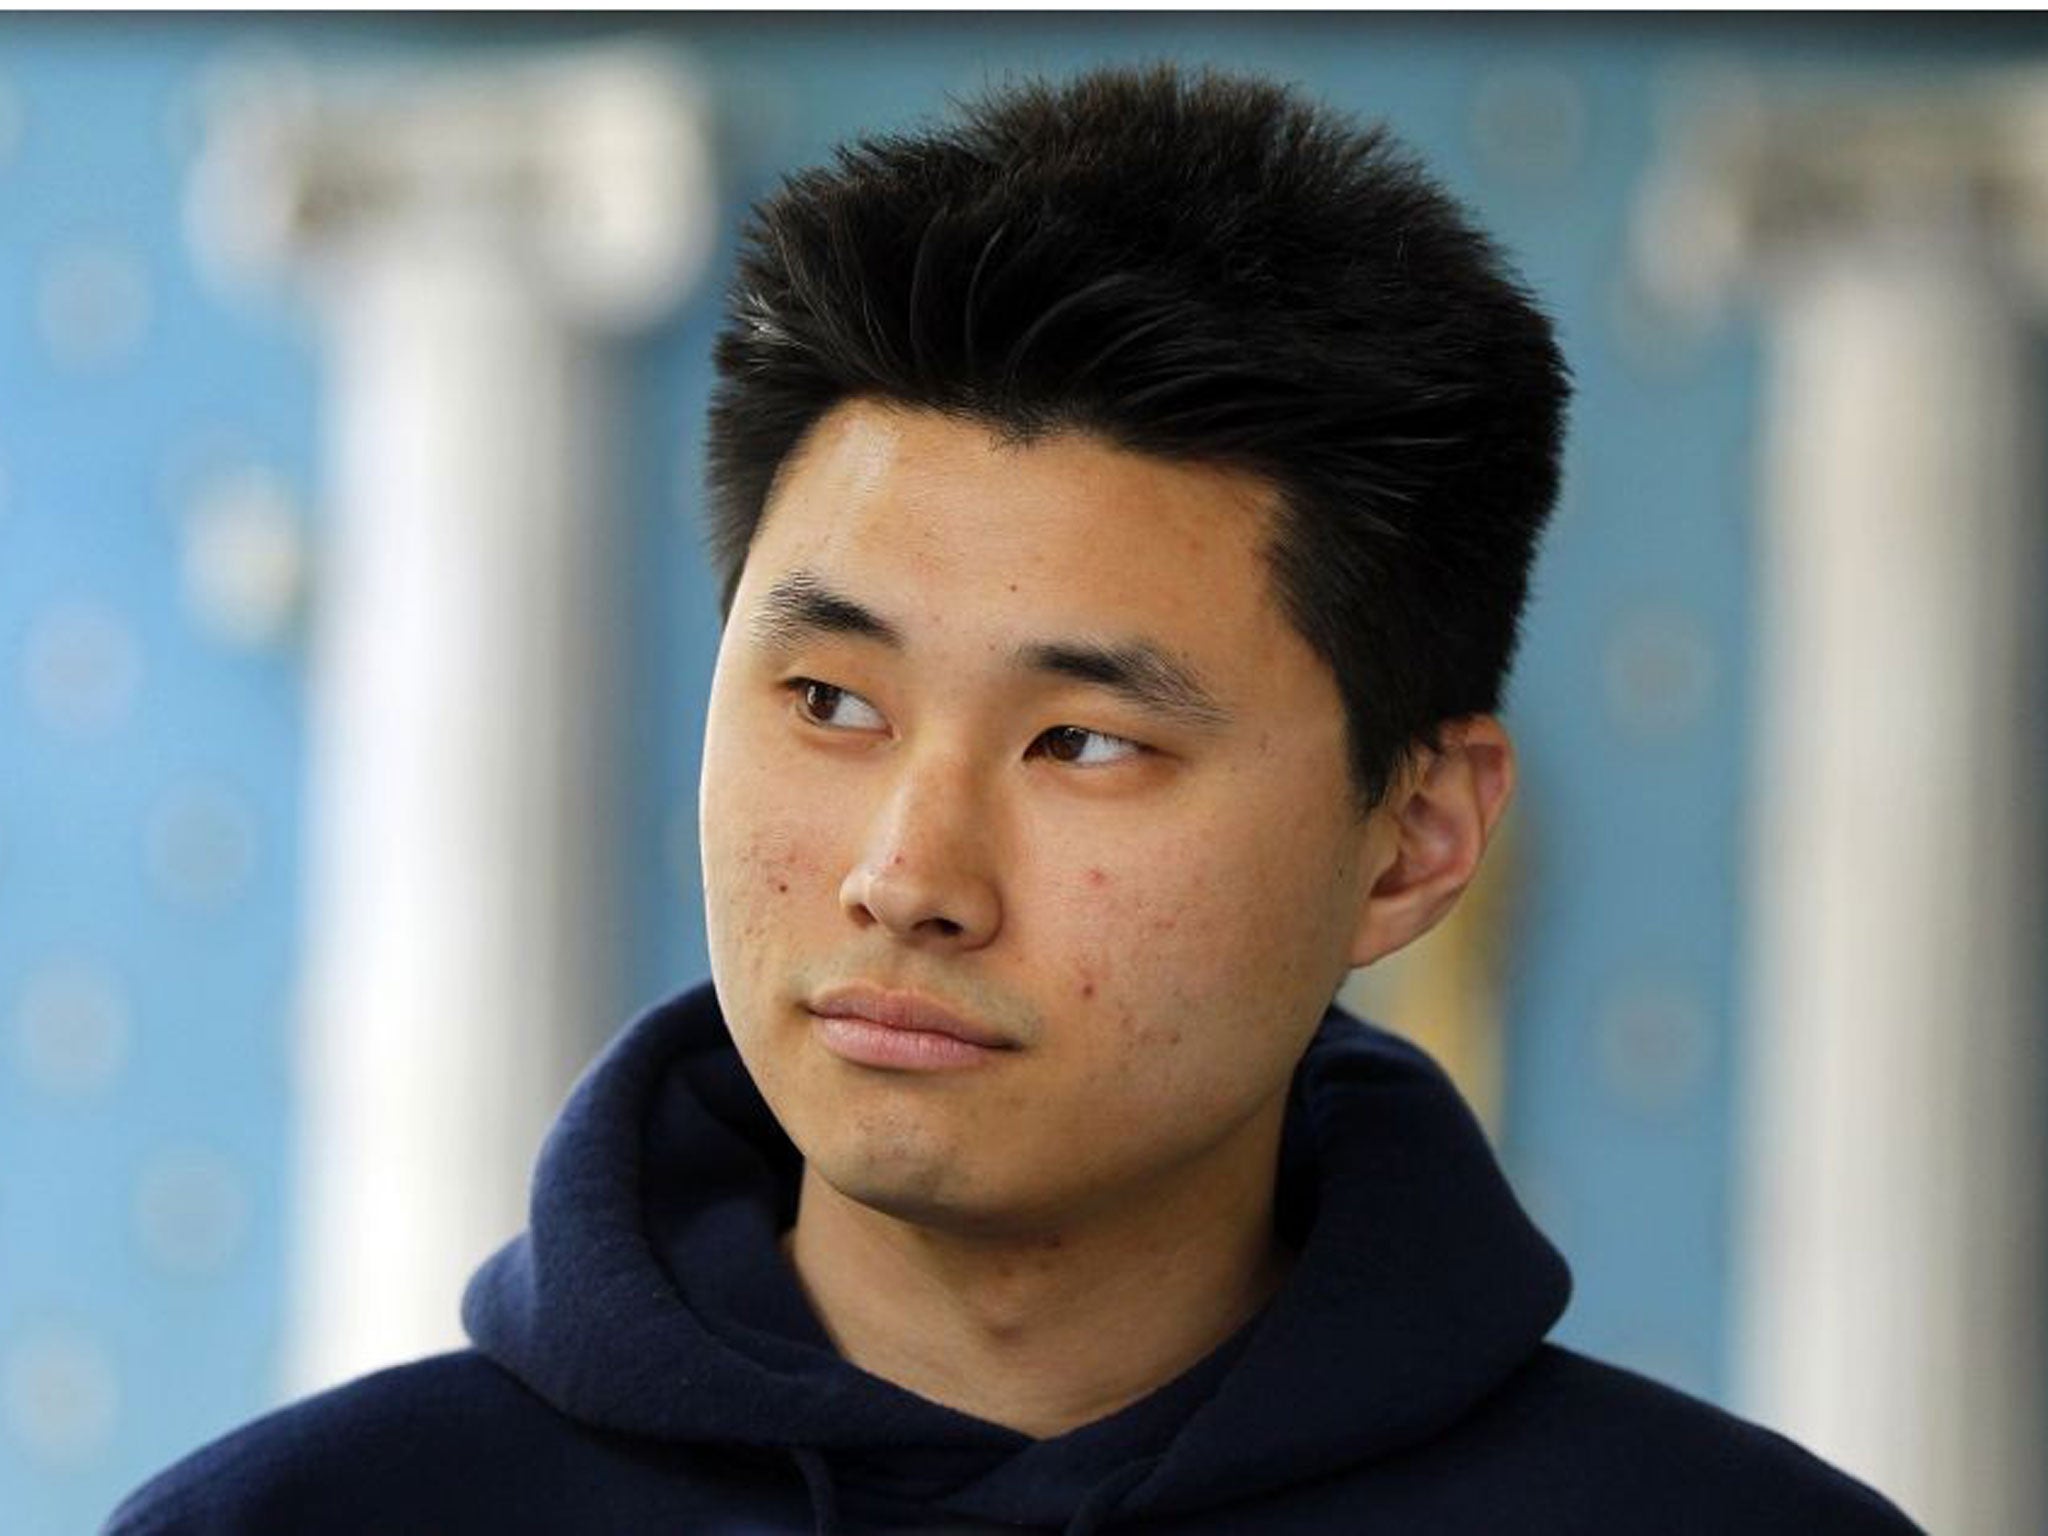 US student Daniel Chong received a $4.1m settlement after police abandoned him in a cell for 5 days